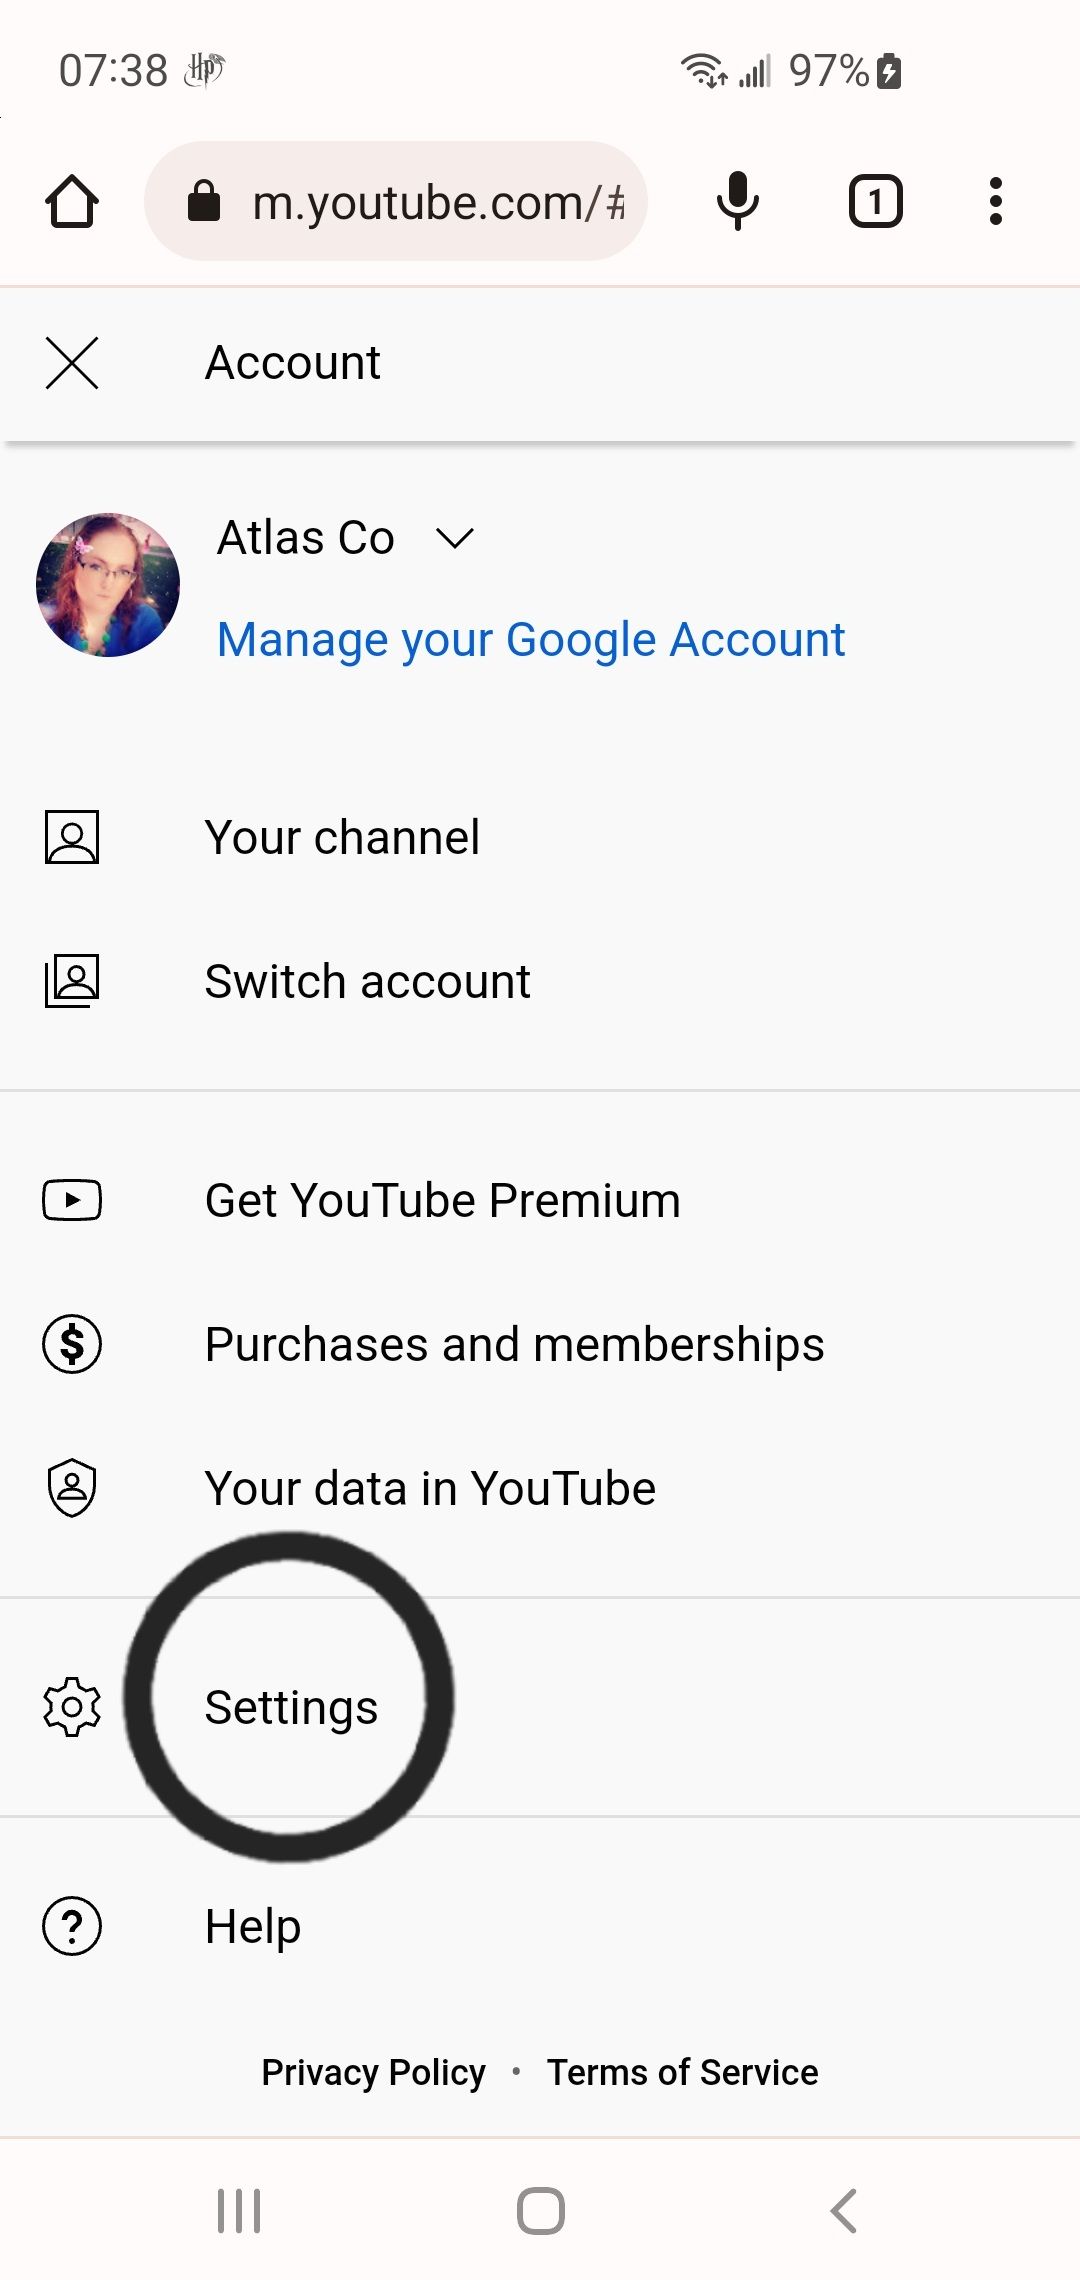 Select Settings on the Account page of the YouTube app